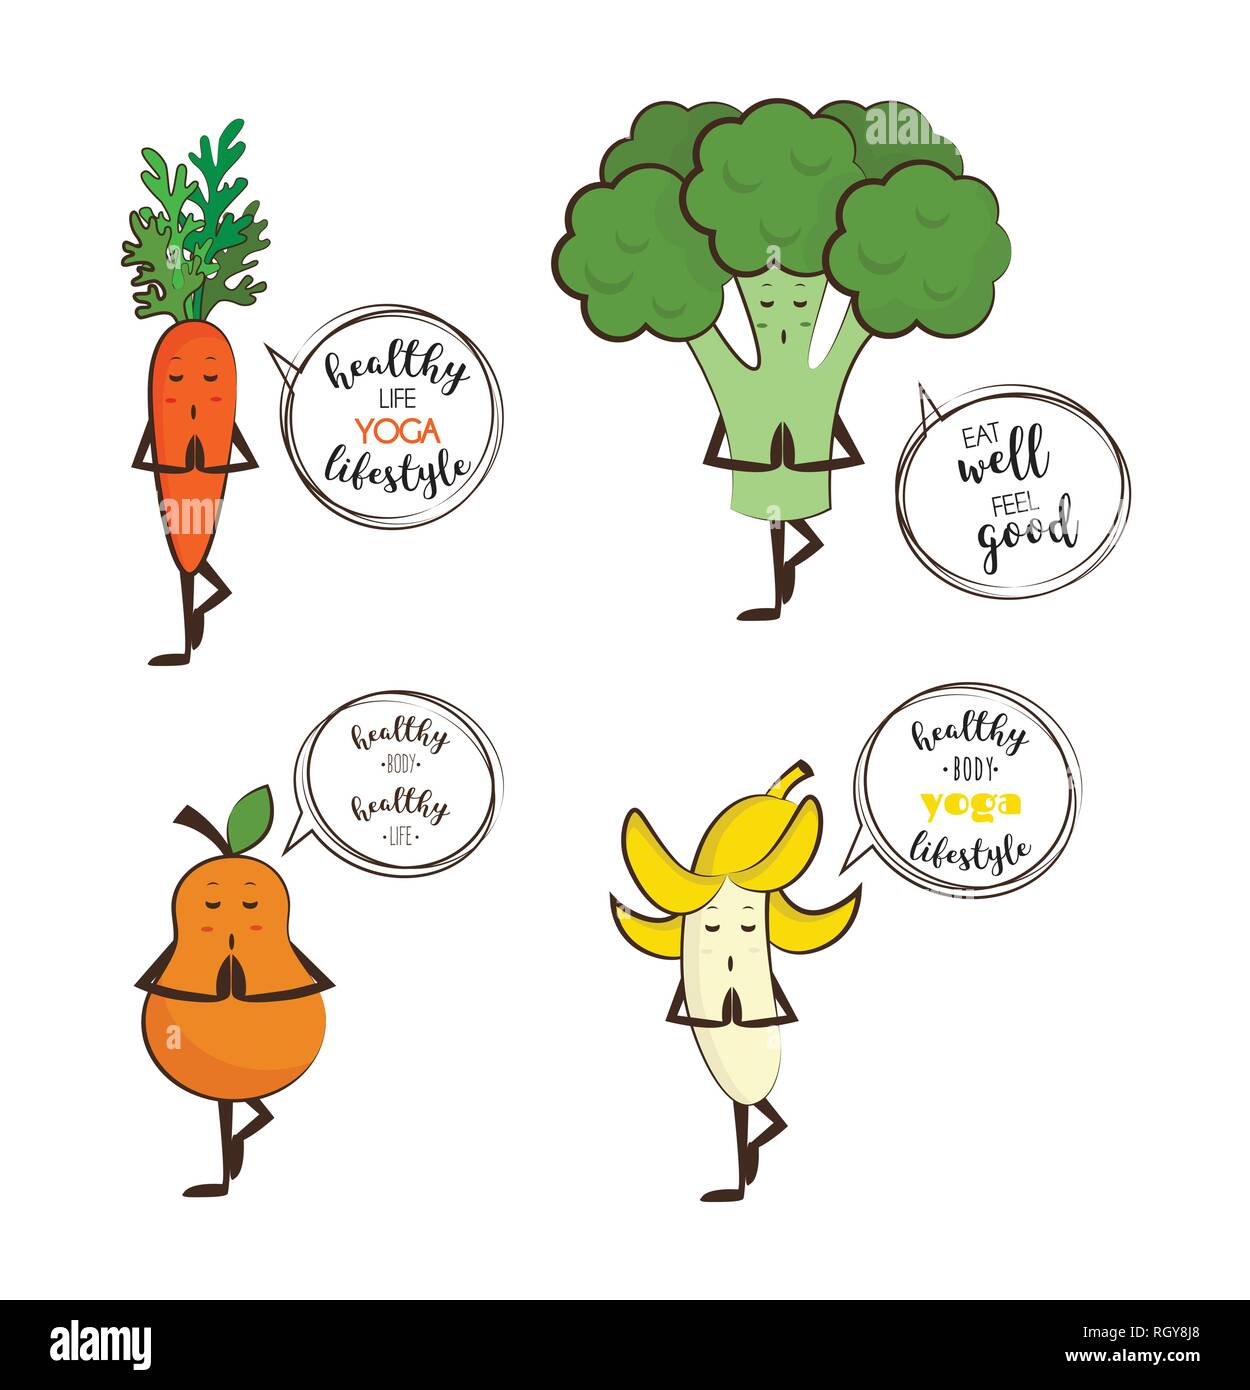 https://c8.alamy.com/comp/RGY8J8/set-of-cute-fruits-and-vegetables-doing-yoga-with-motivation-quotes-vector-illustration-RGY8J8.jpg